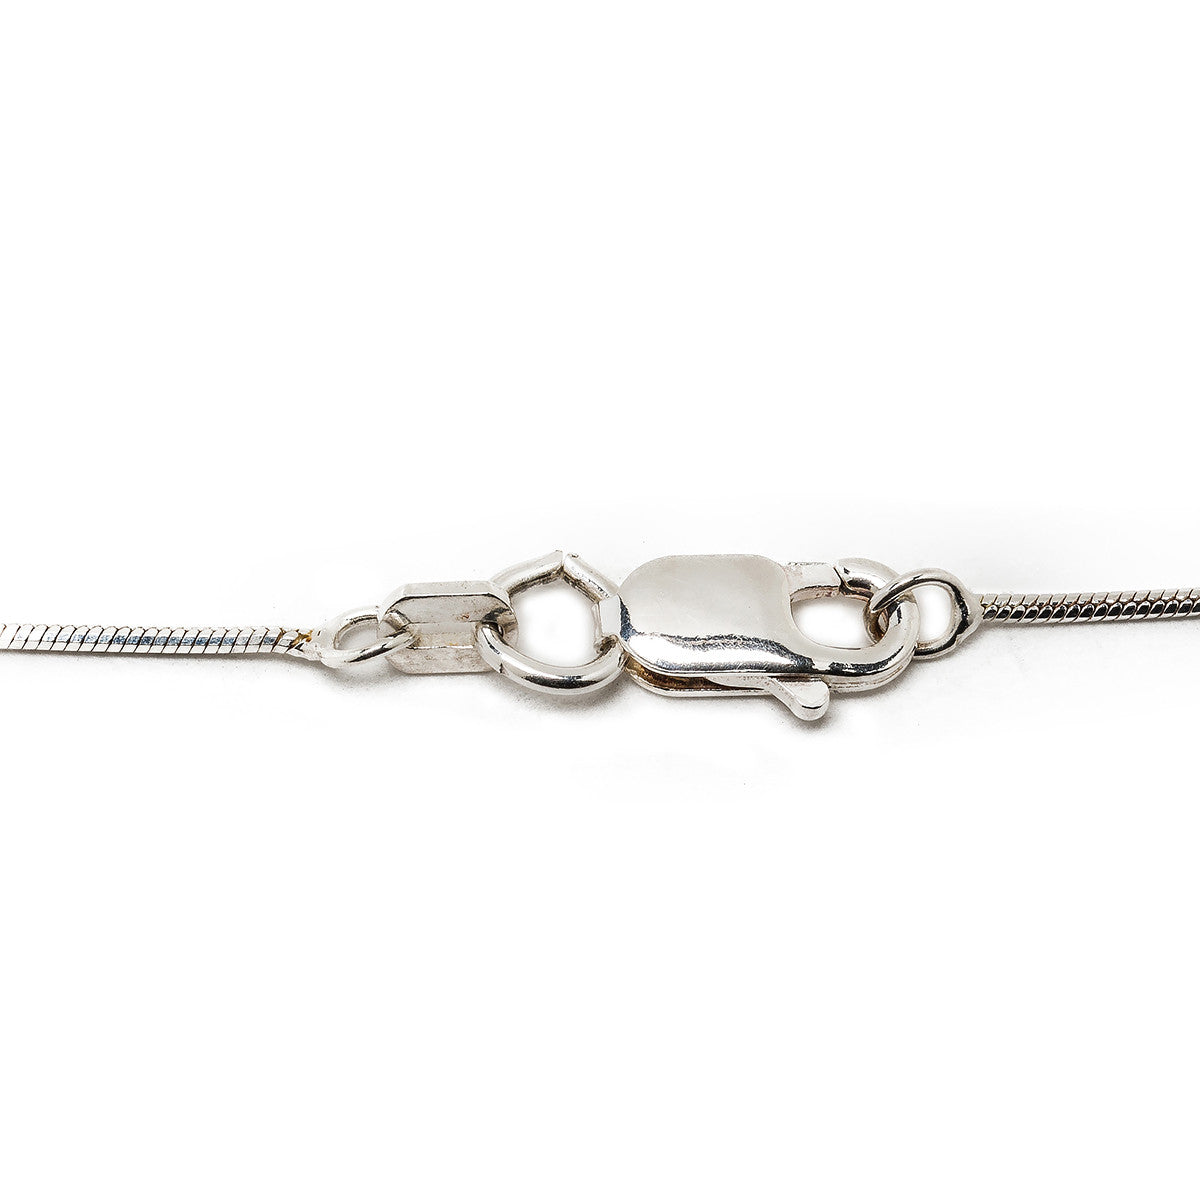 1MM Sterling Silver Snake Chain with Lobster Claw Clasp. Italian Sterling Silver, 16"-30"